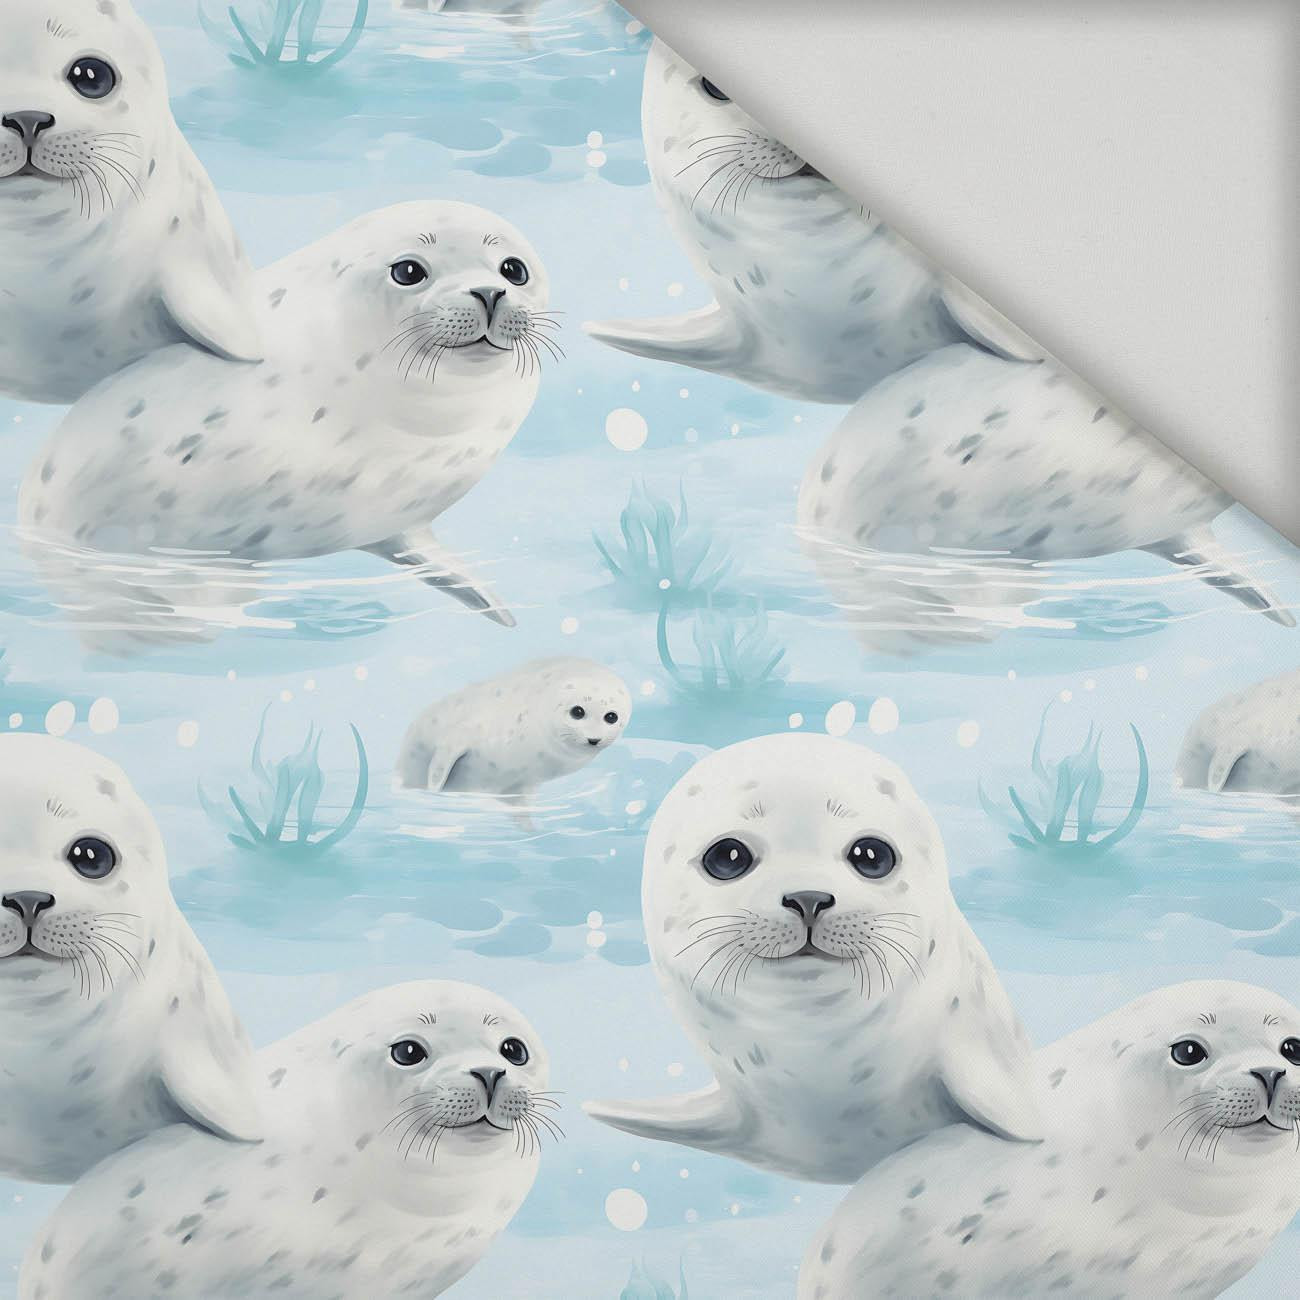 ARCTIC SEAL - quick-drying woven fabric